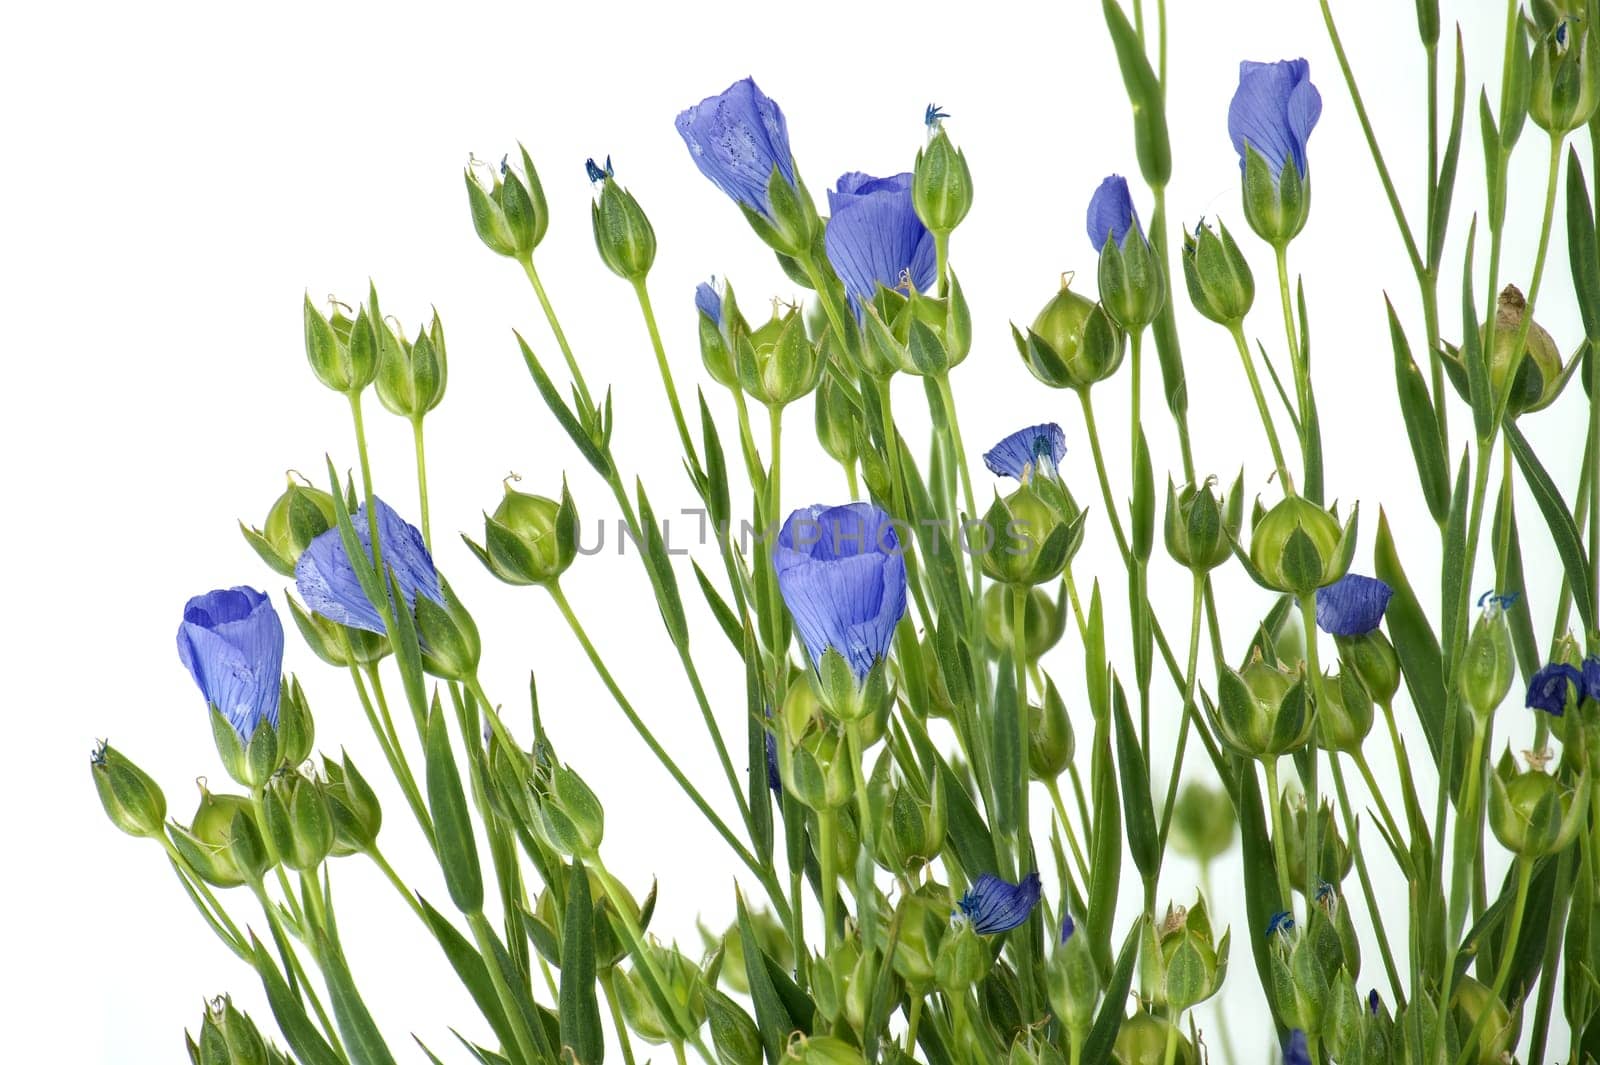 Blue flax blossom in close up over white background by NetPix